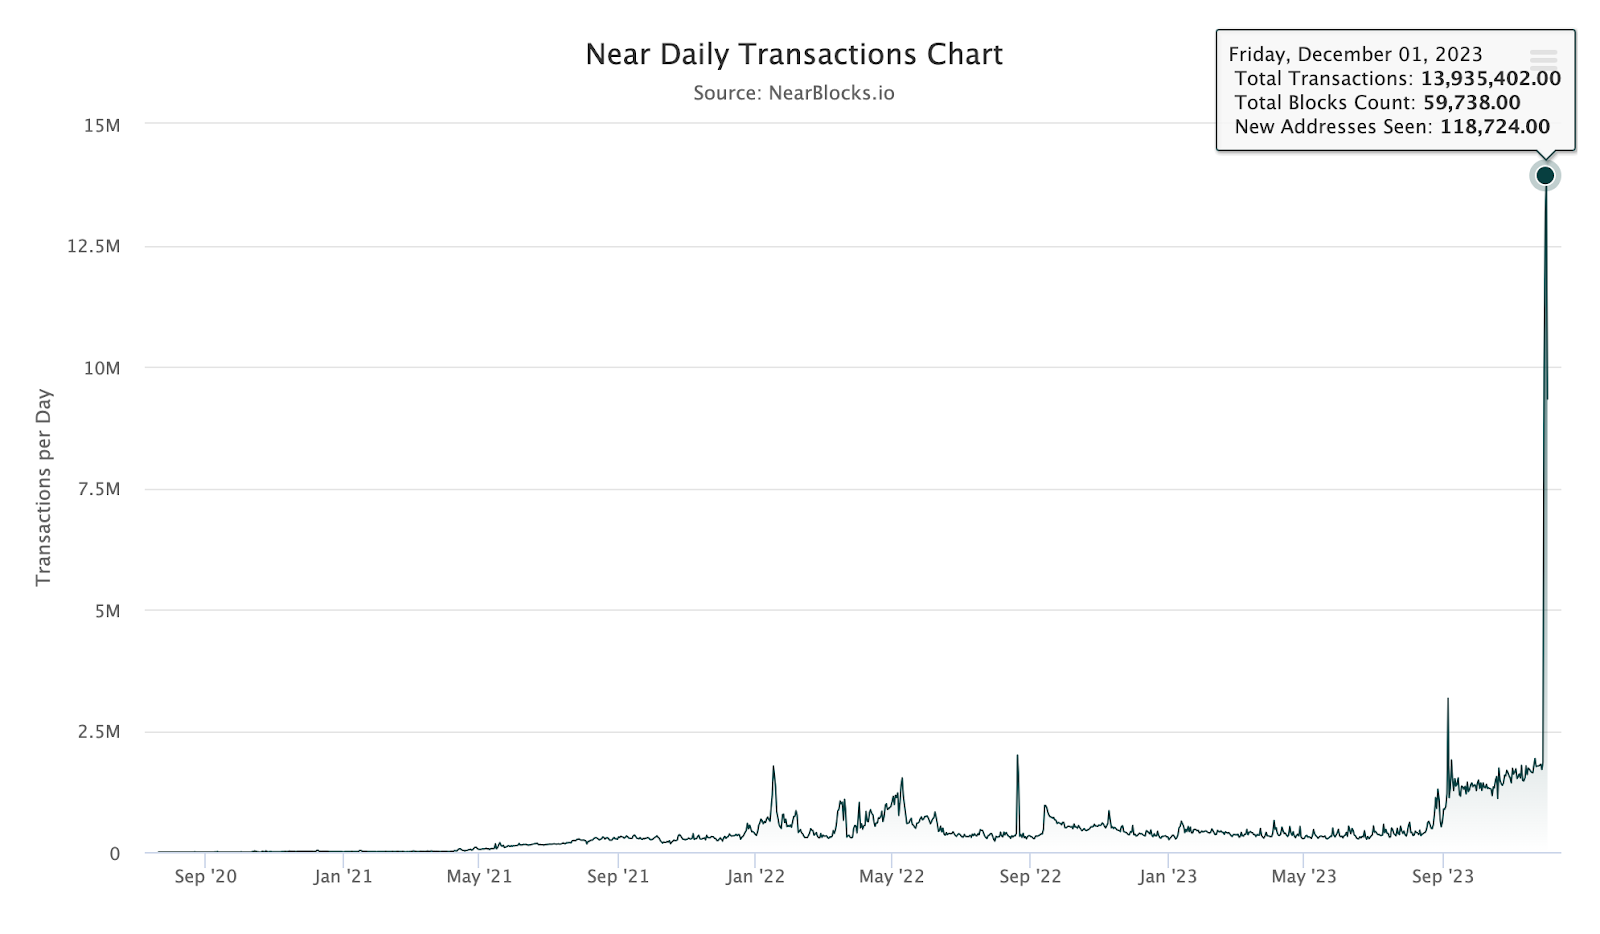 Near Chain’s Daily Transactions Spiked Over 13.935M on December 1